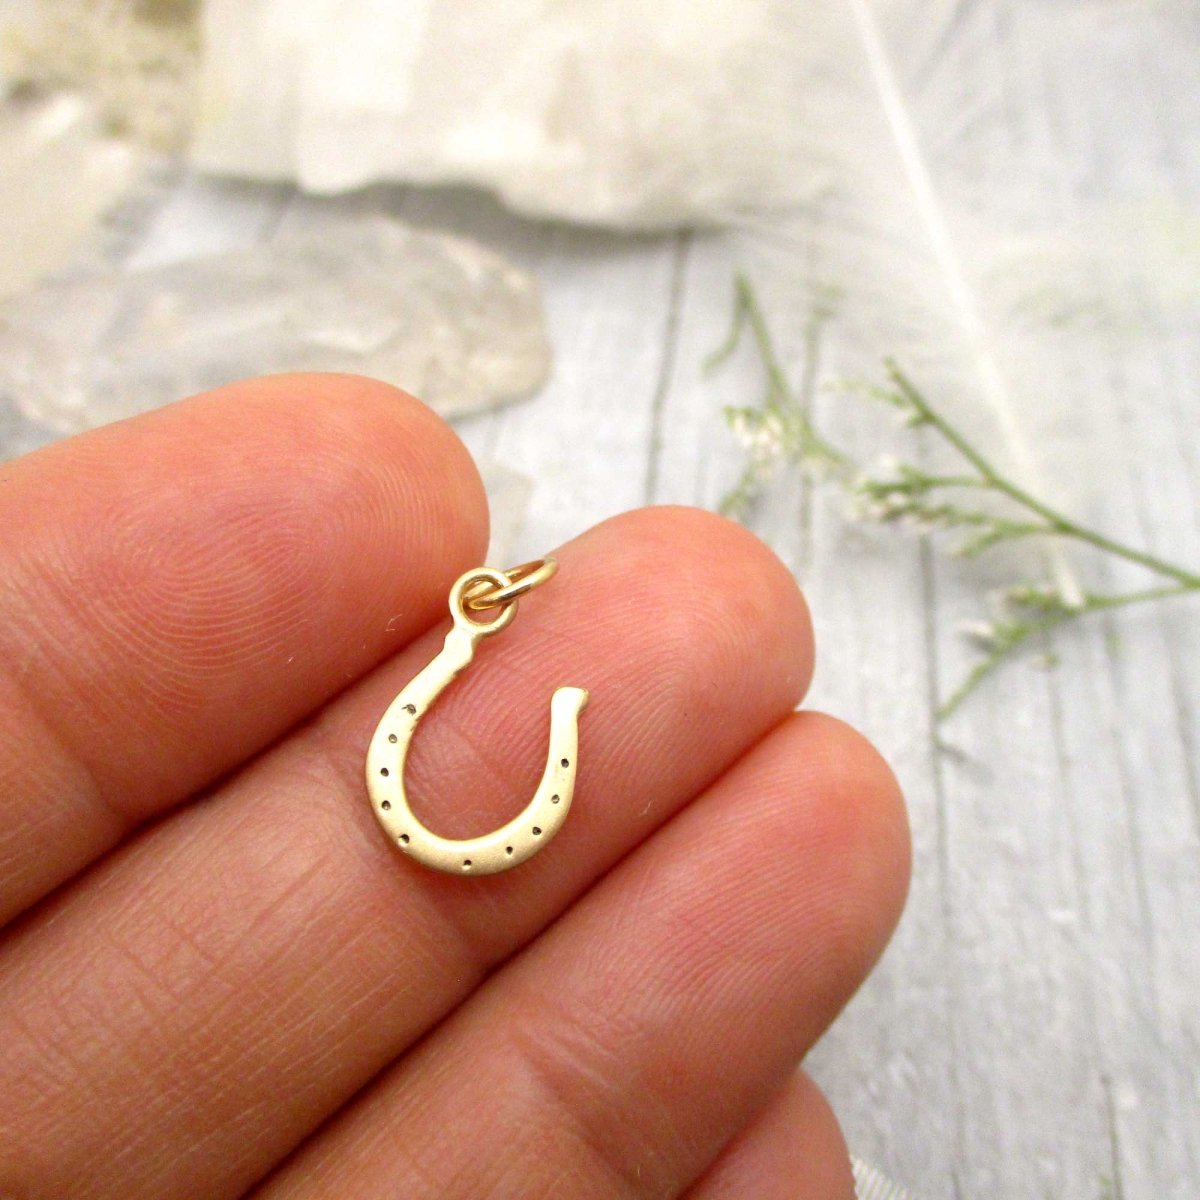 Small Good Luck Horseshoe Charm in Solid 14 Karat Yellow Gold - Luxe Design Jewellery